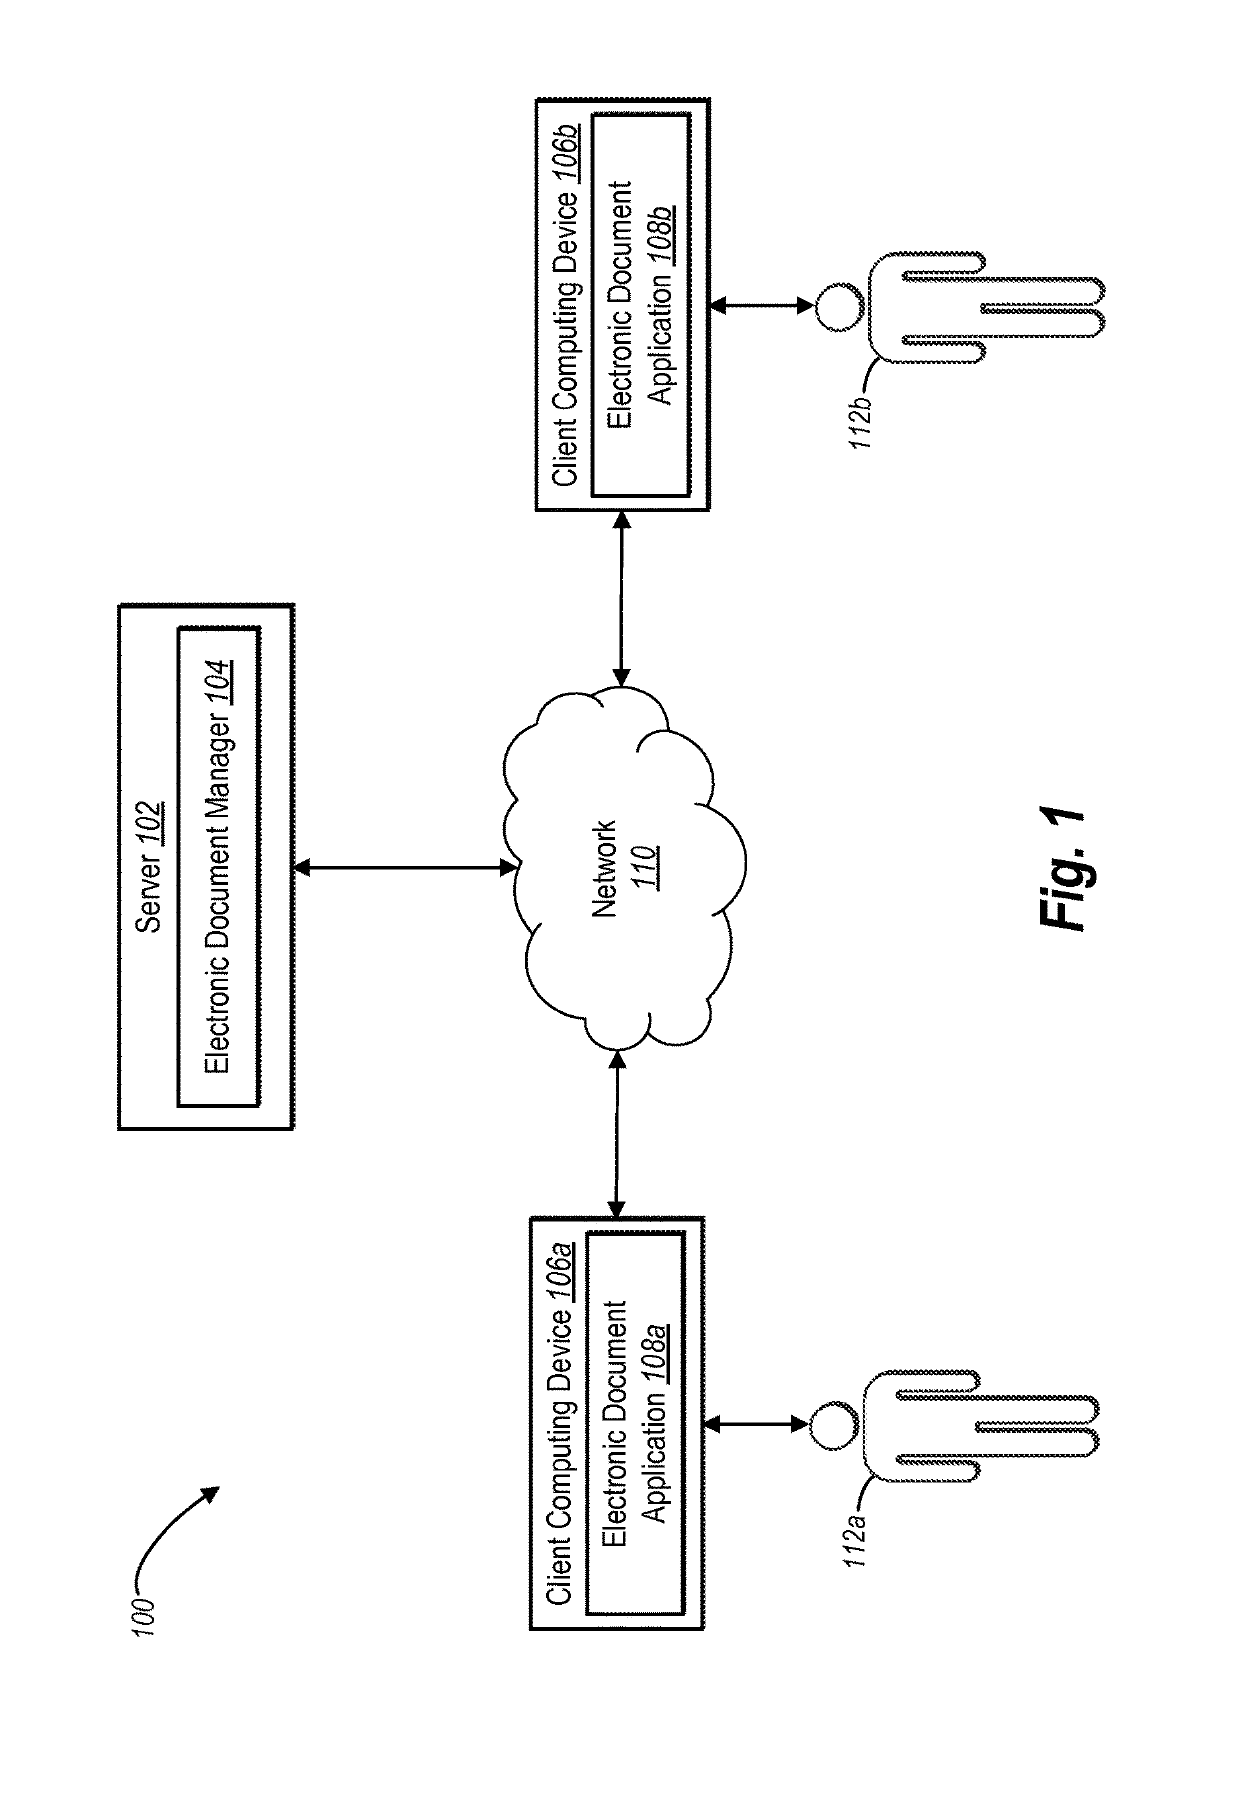 Tracking and facilitating renewal of documents using an electronic signature system